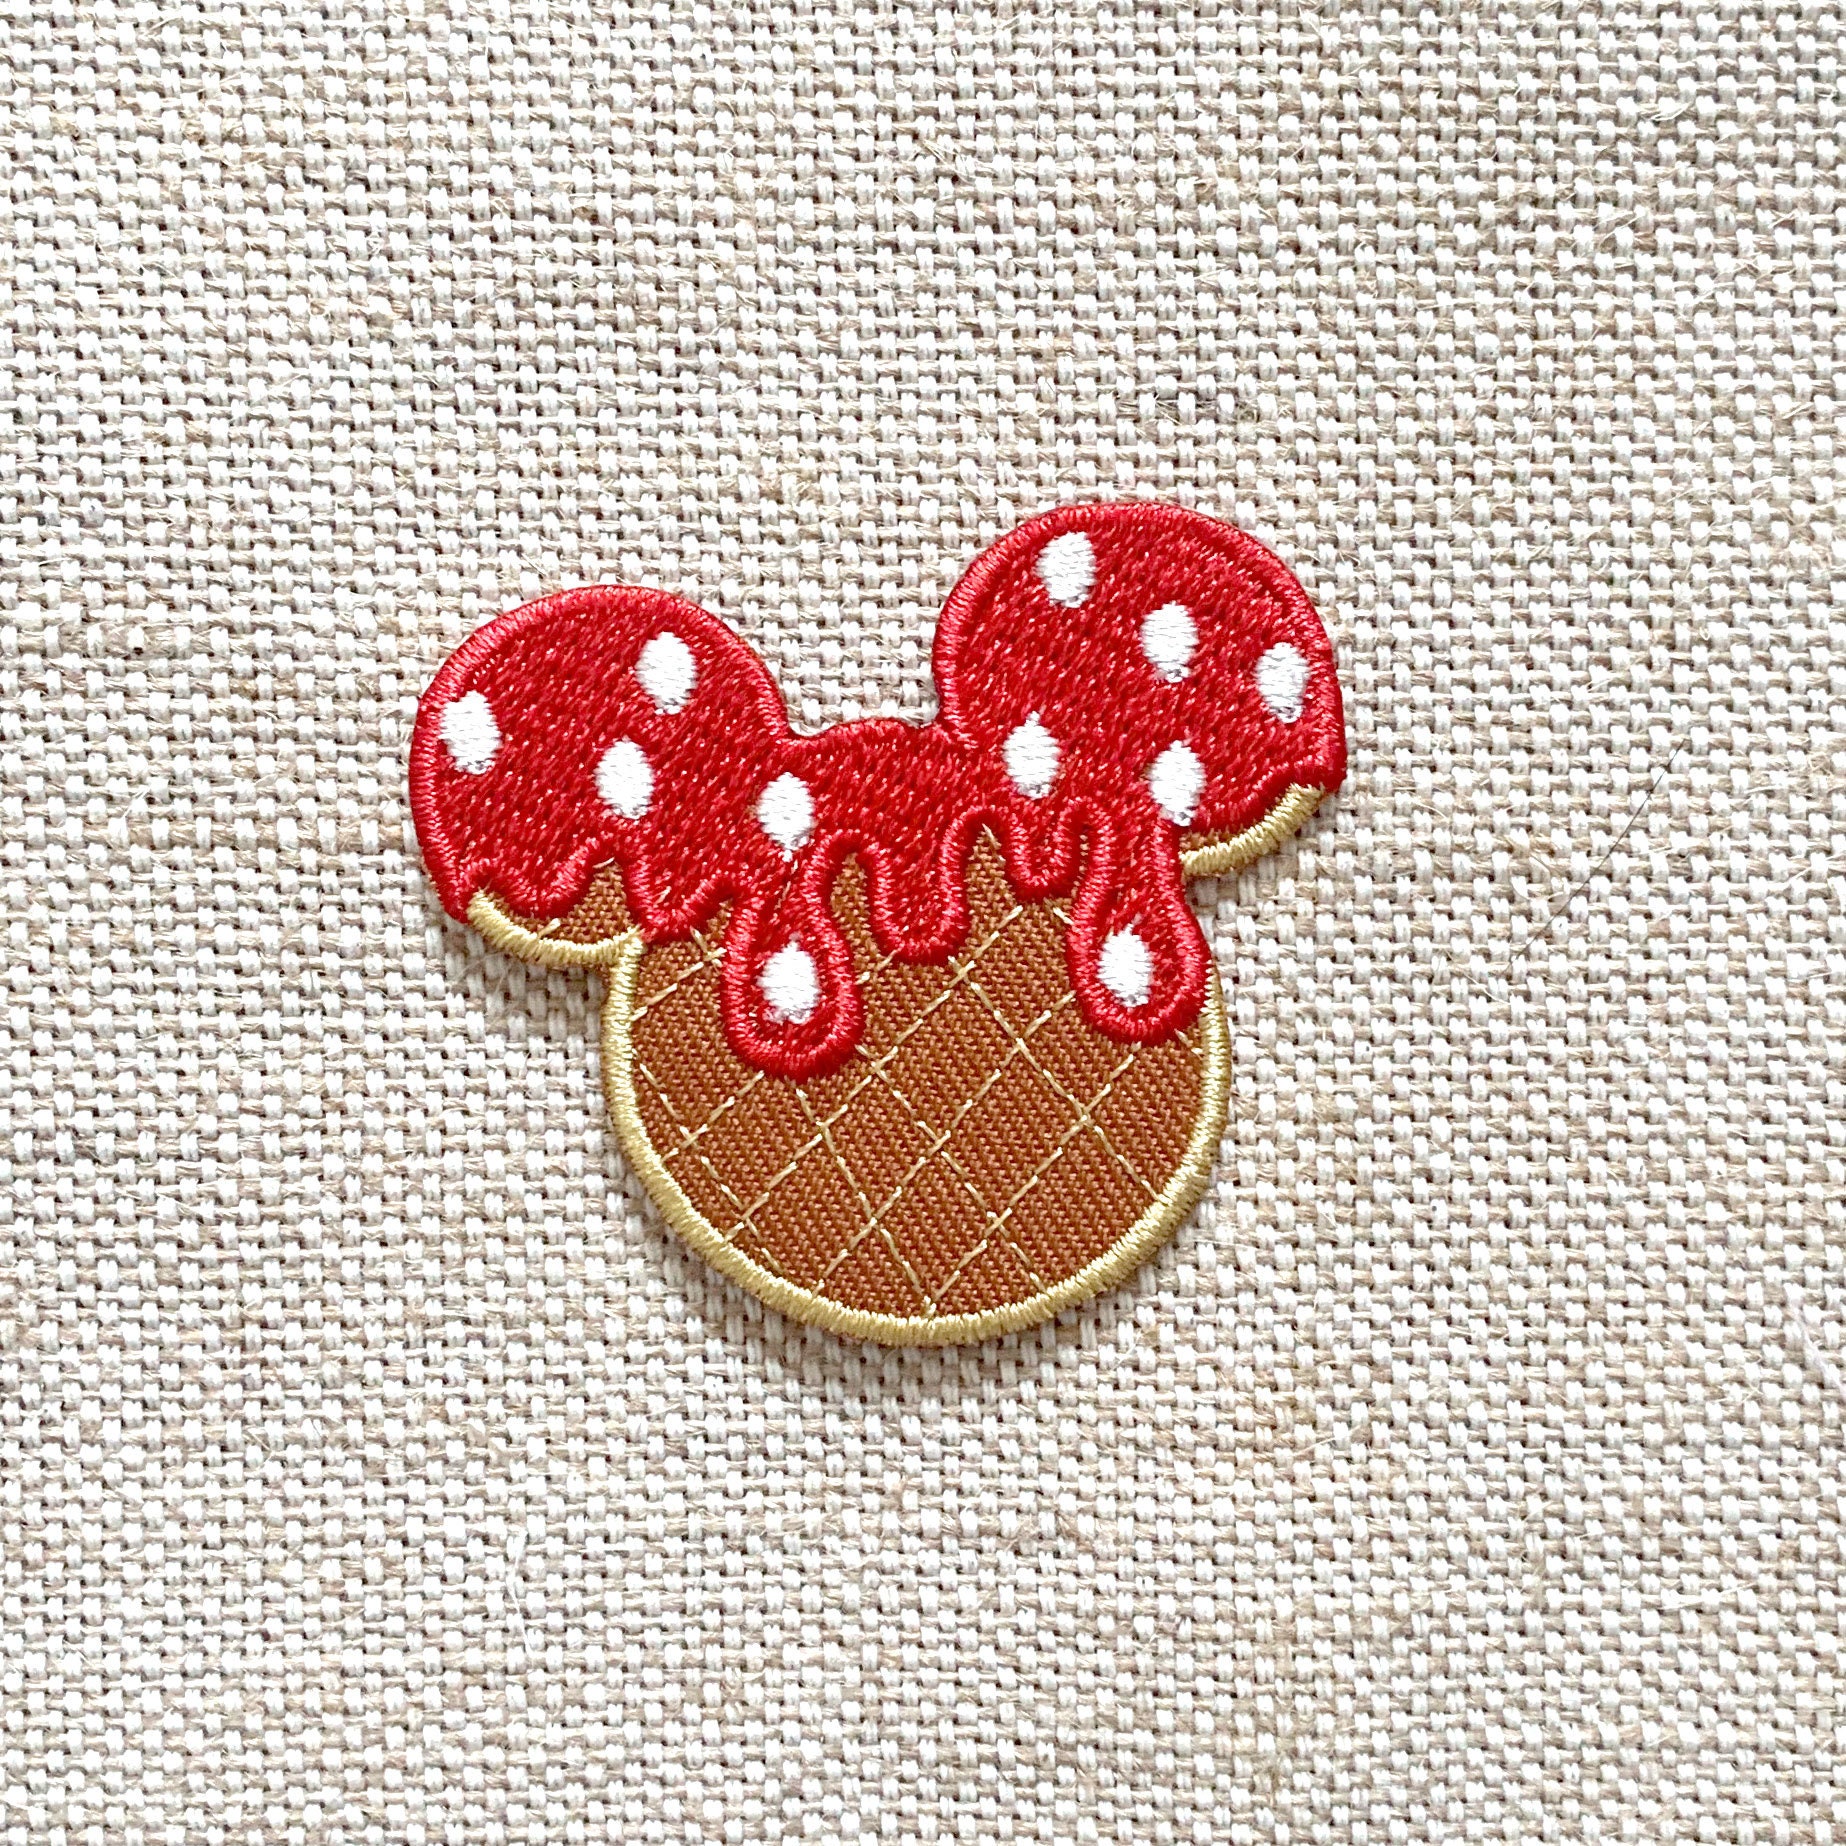  Triple Siblings Mickey Donut Embroidered Iron On Patch